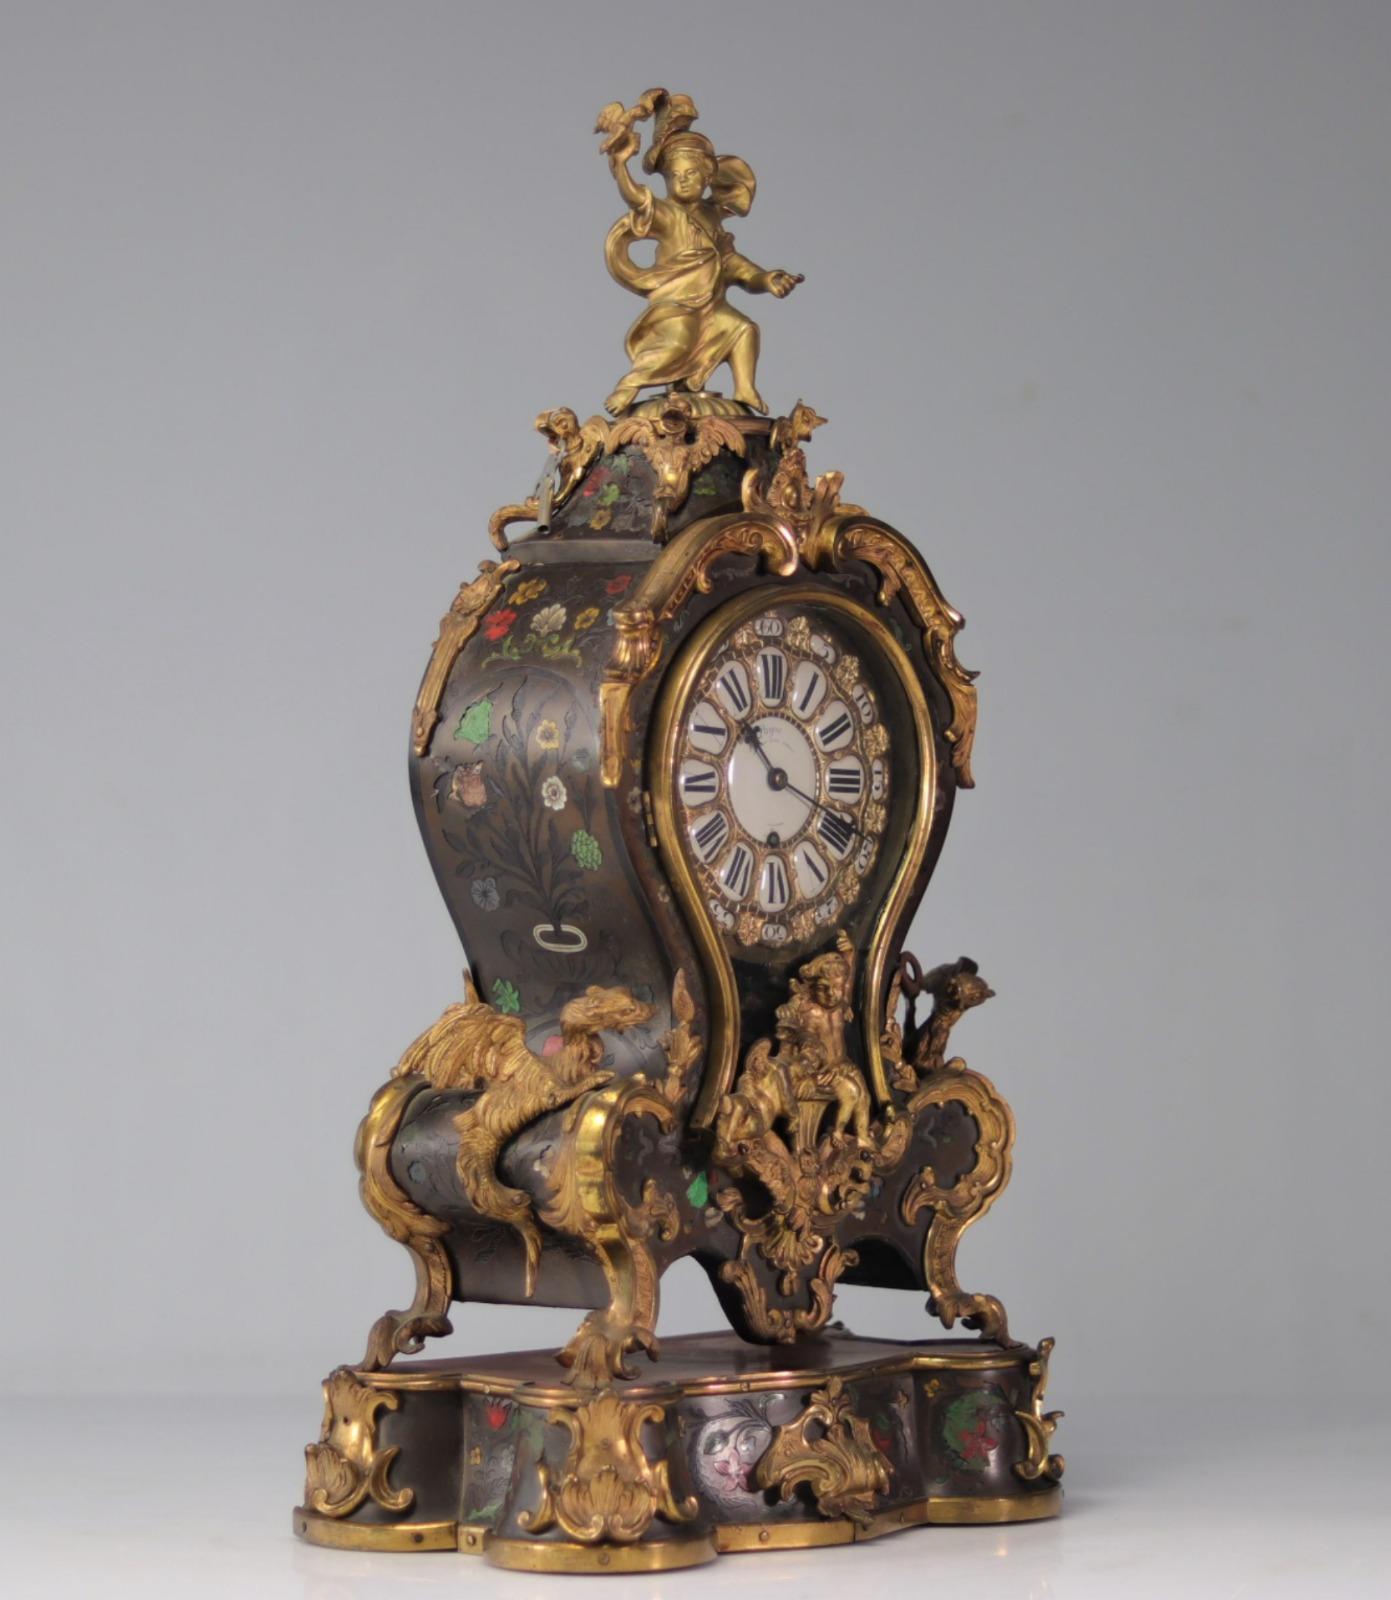 Hand-Crafted Rare 18th Century English Clock For Sale